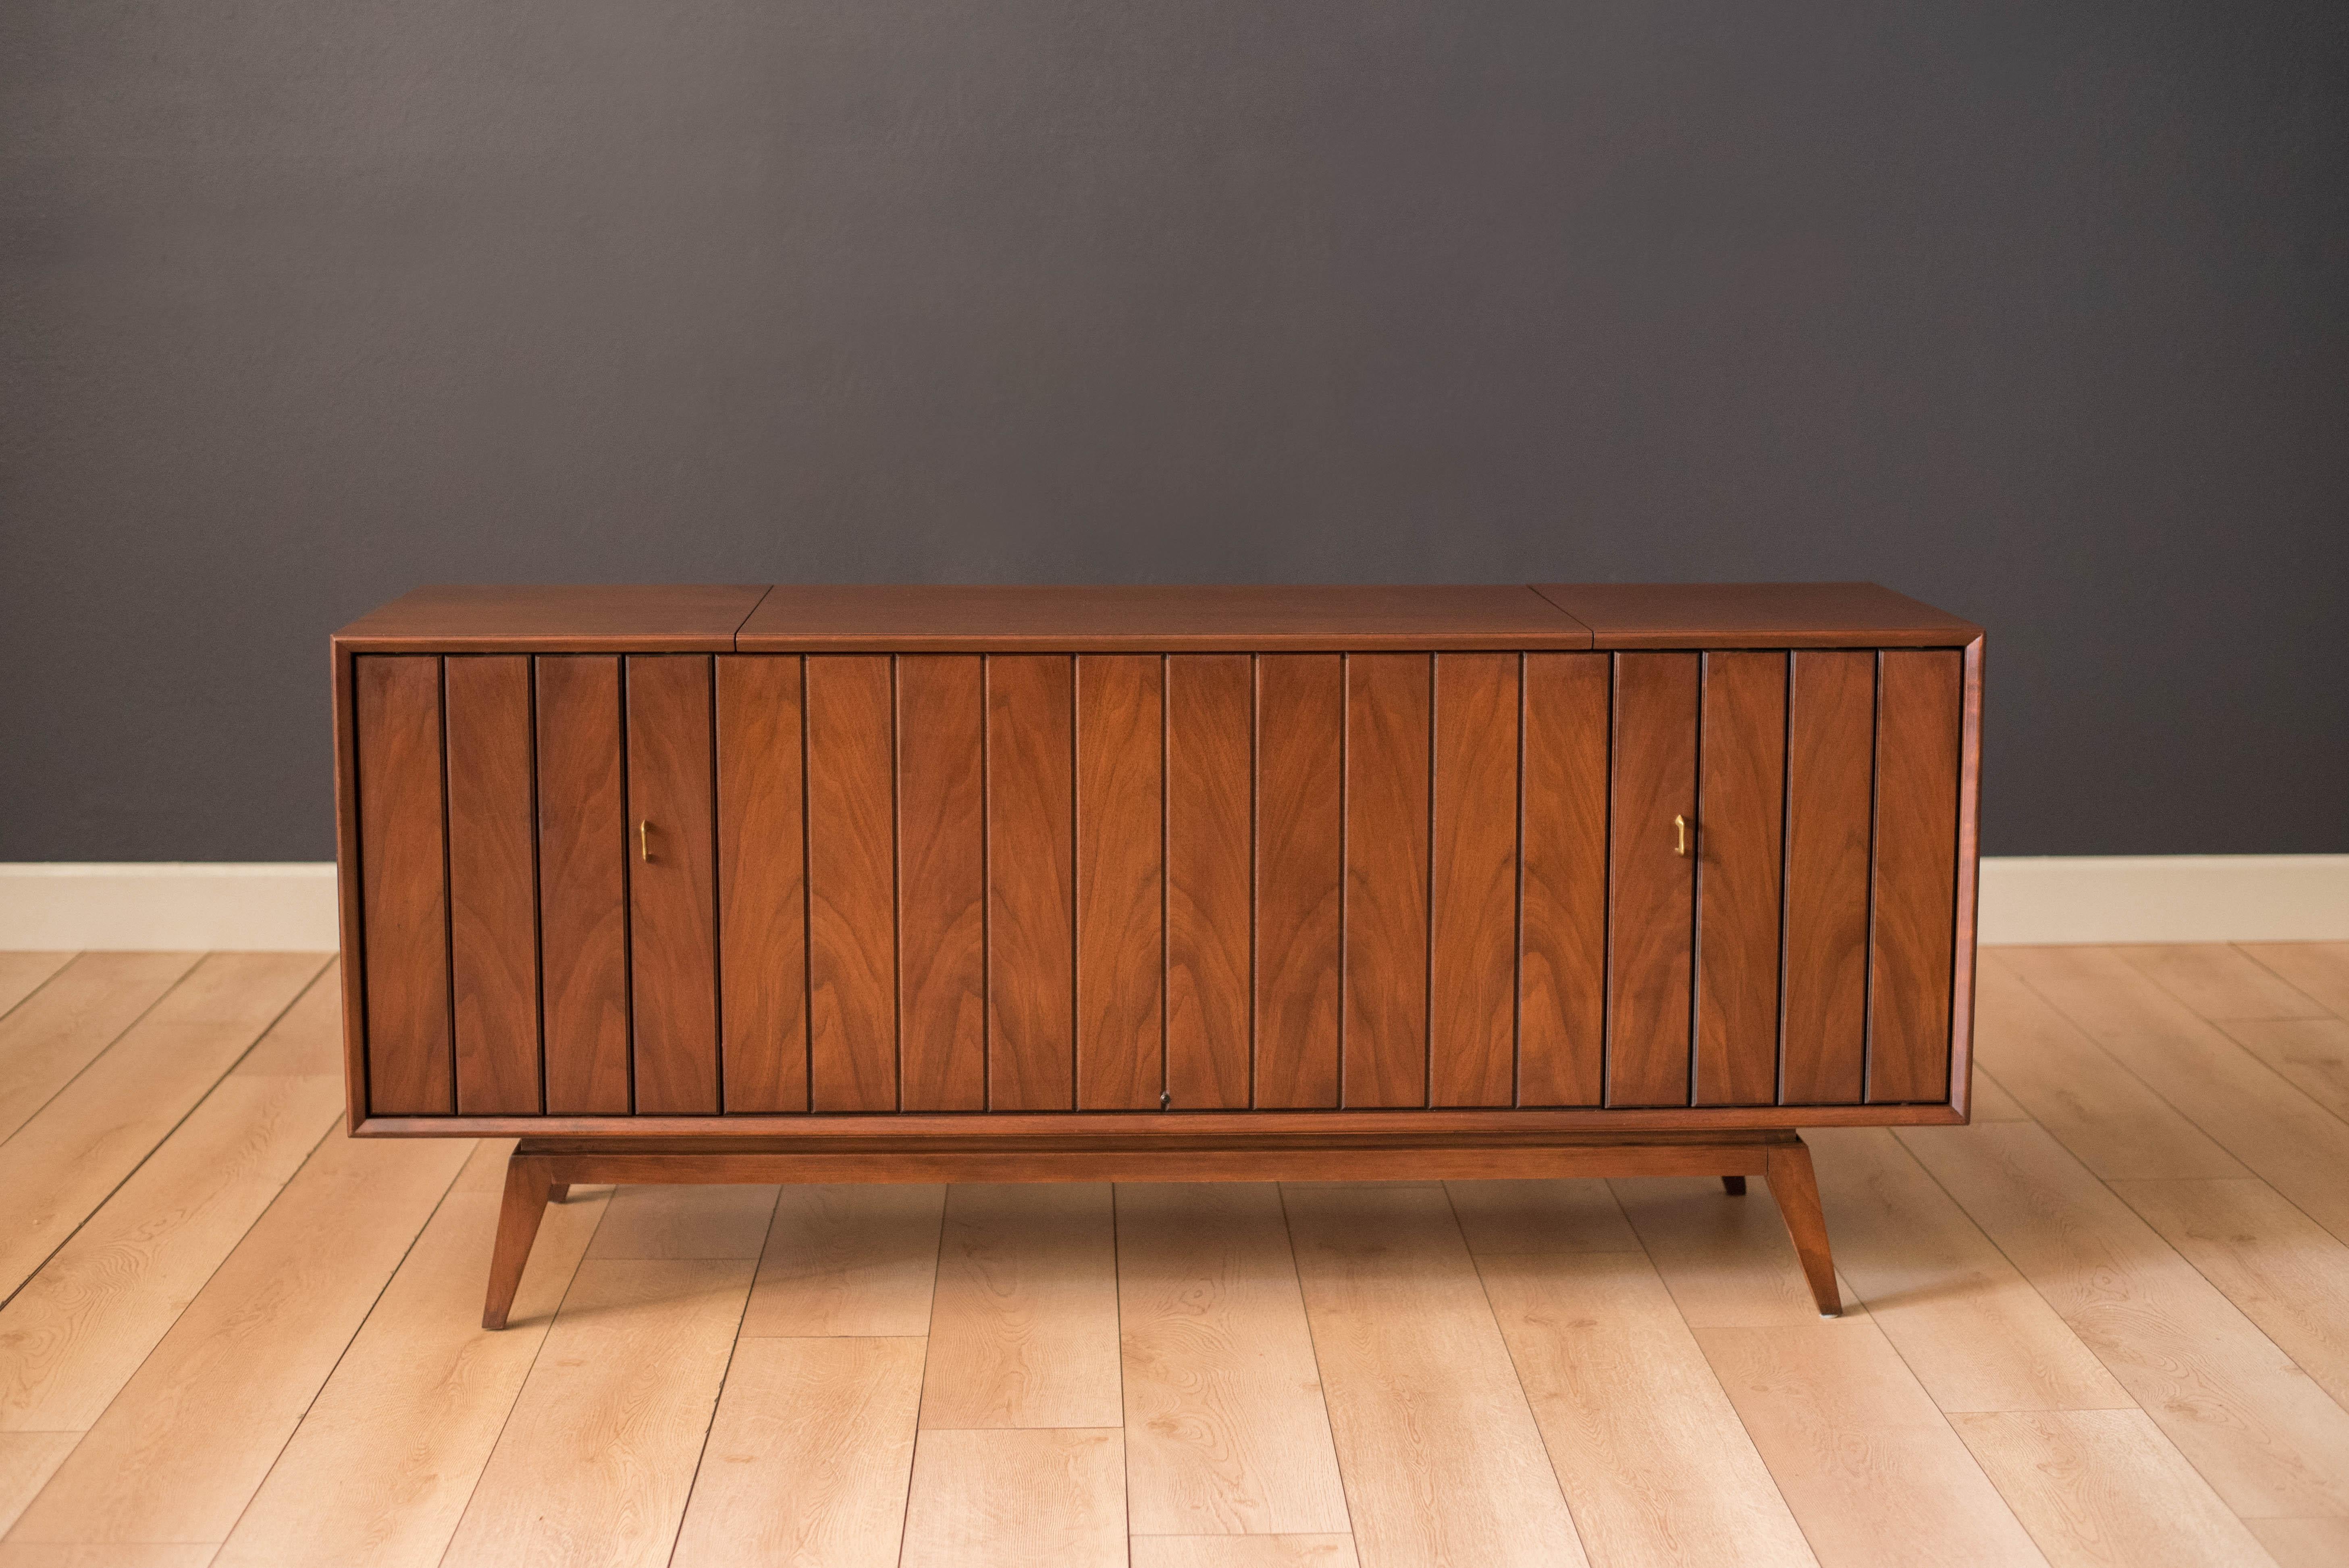 Vintage Zenith Solid State Record console cabinet in walnut, circa 1960s. This piece includes a fully functional record player, AM/FM radio, speakers, and phonograph (not tested), complete with original manual. The cabinet features a stunning walnut